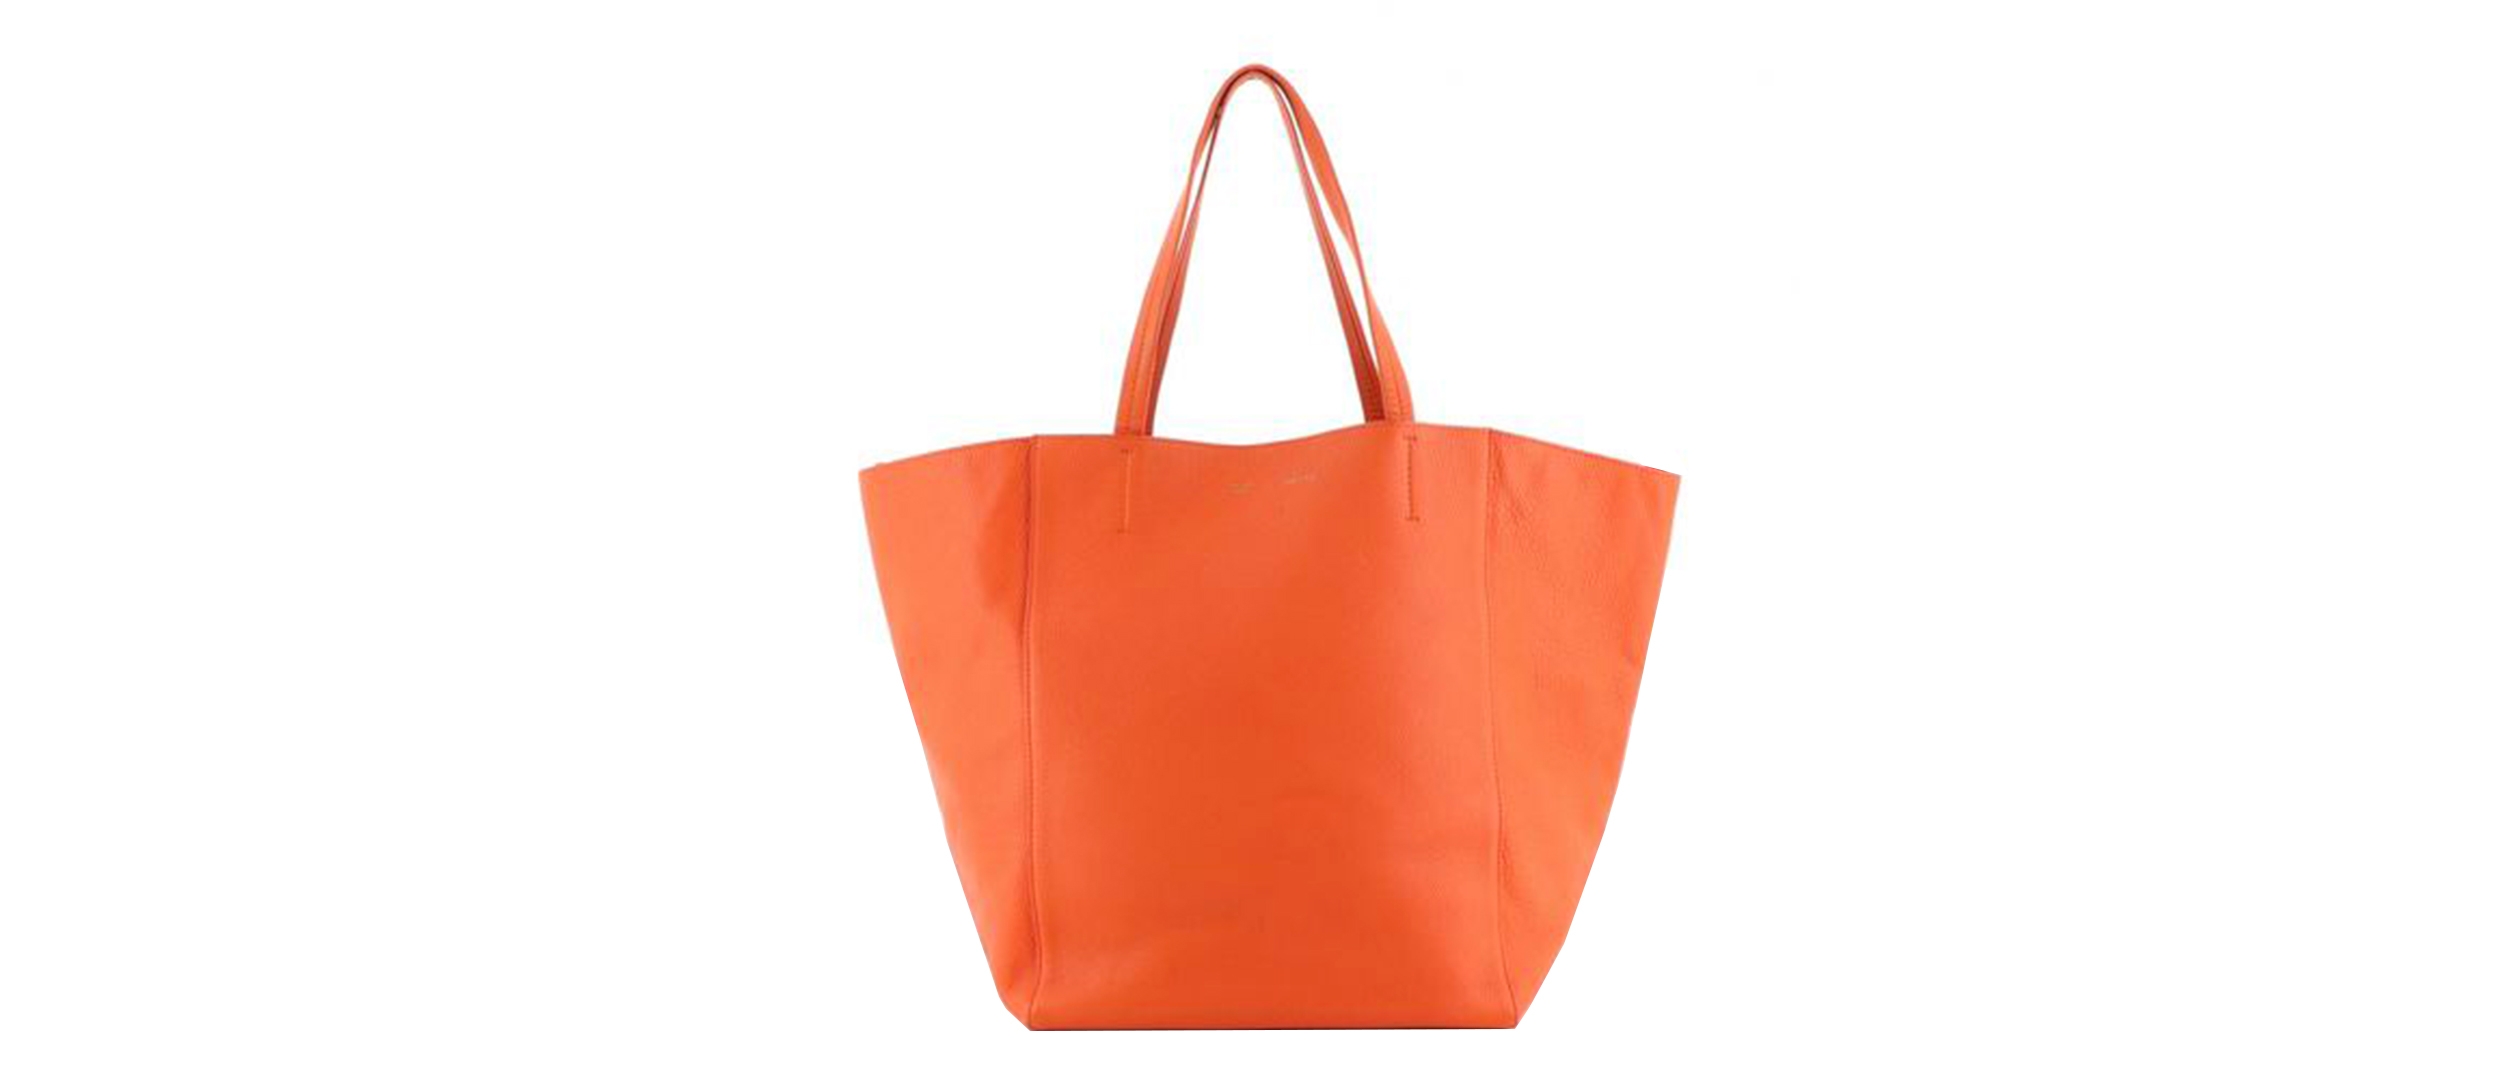 Top 5 Tote Bags for Work, Rest & Play - Vestiaire Collective